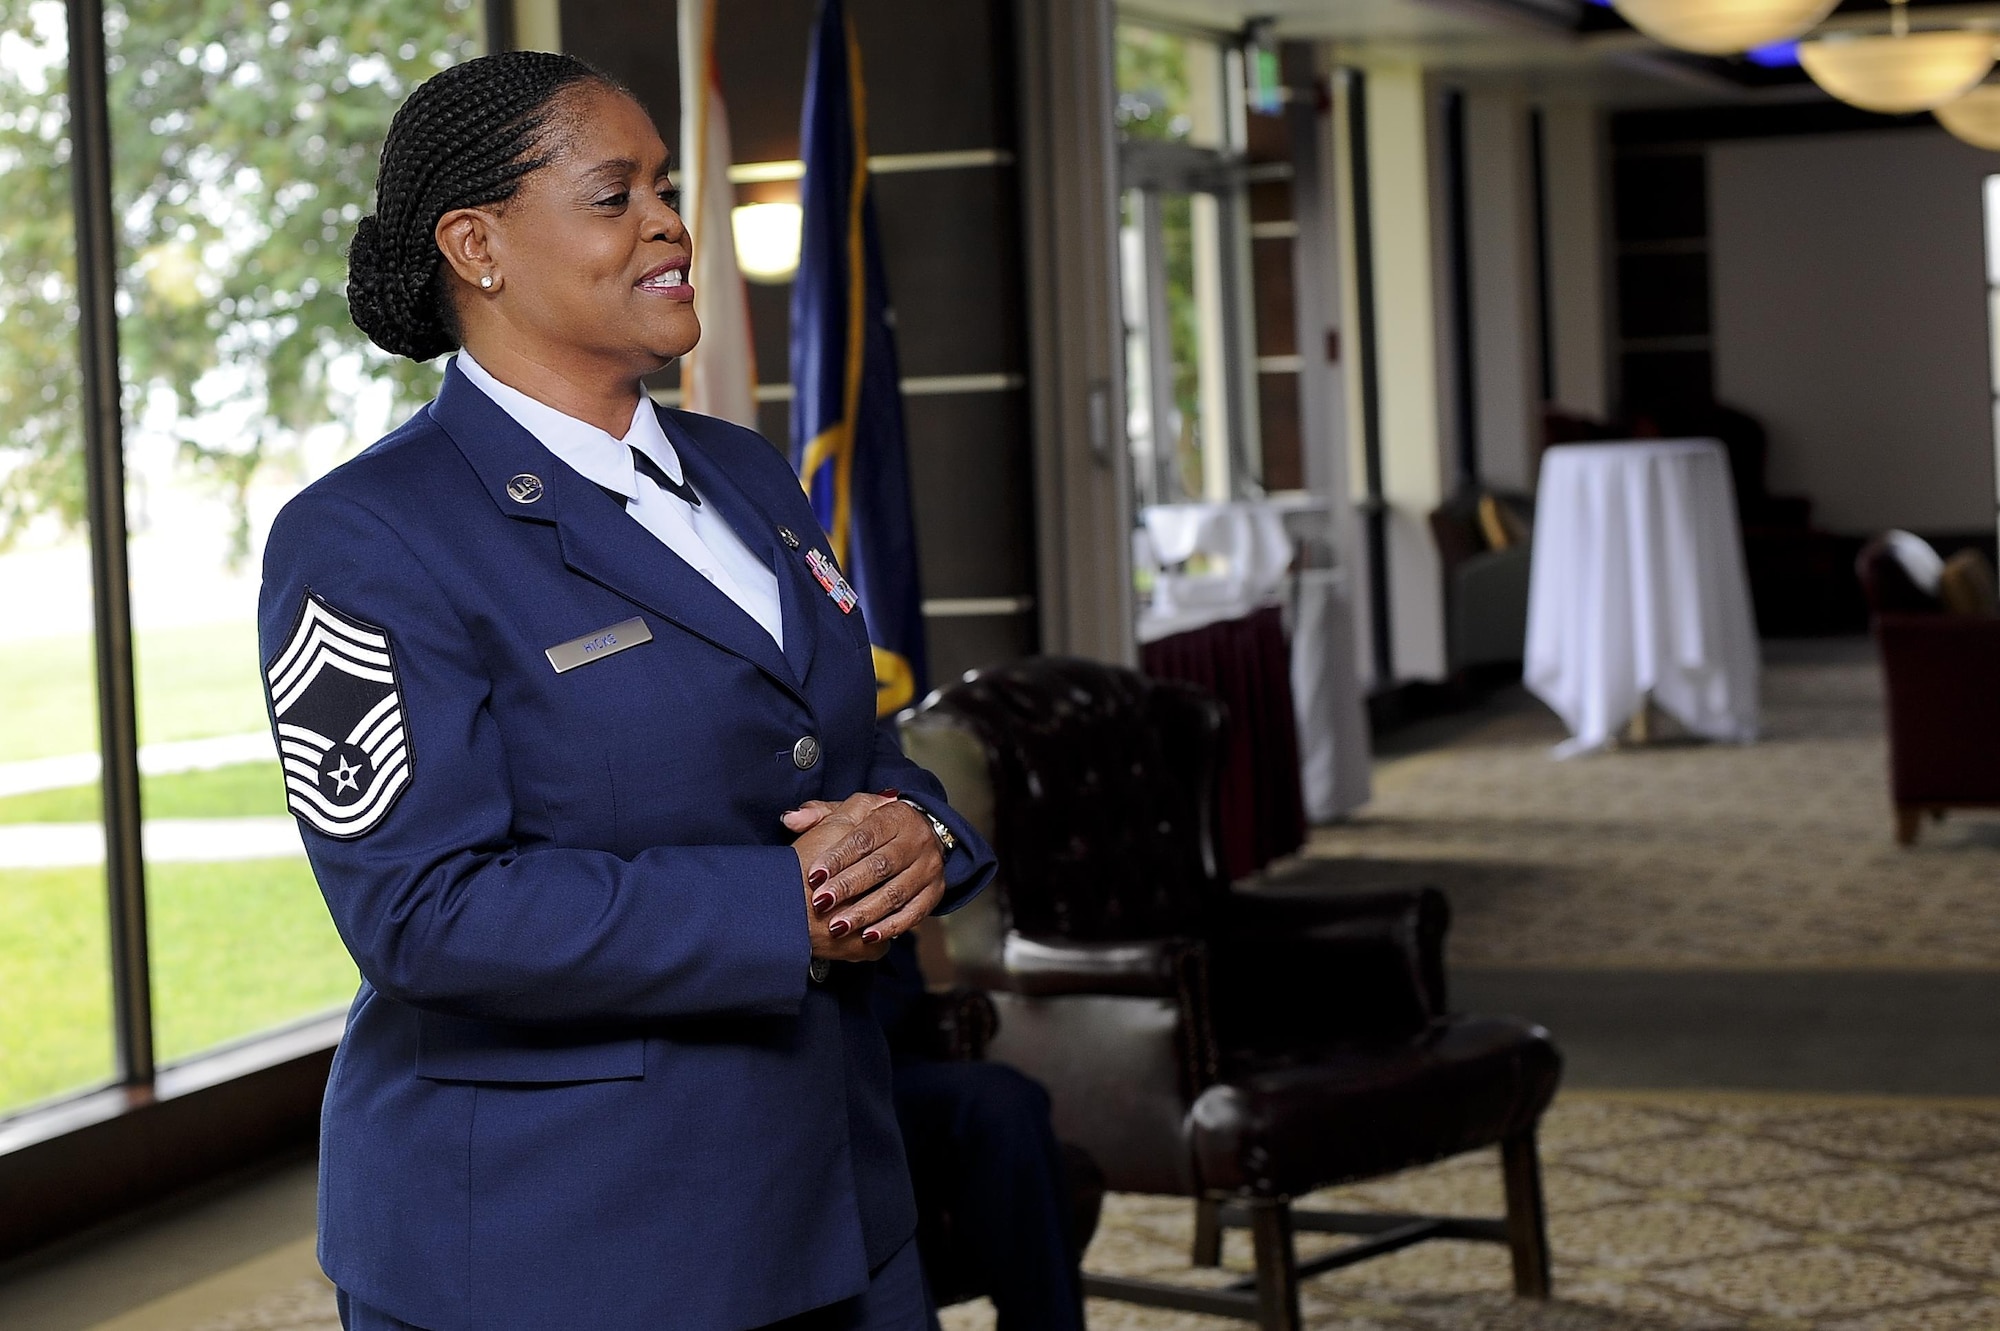 Chief Master Sgt. Lessie Hicks, mission support chief with the 290th Joint Communications Support Squadron (JCSS), speaks at her promotion ceremony, July 29, 2016, at MacDill Air Force Base, Fla. Hicks is the first African-American and female chief at the 290th JCSS. (U.S. Air Force photo by Airman 1st Class Mariette Adams)